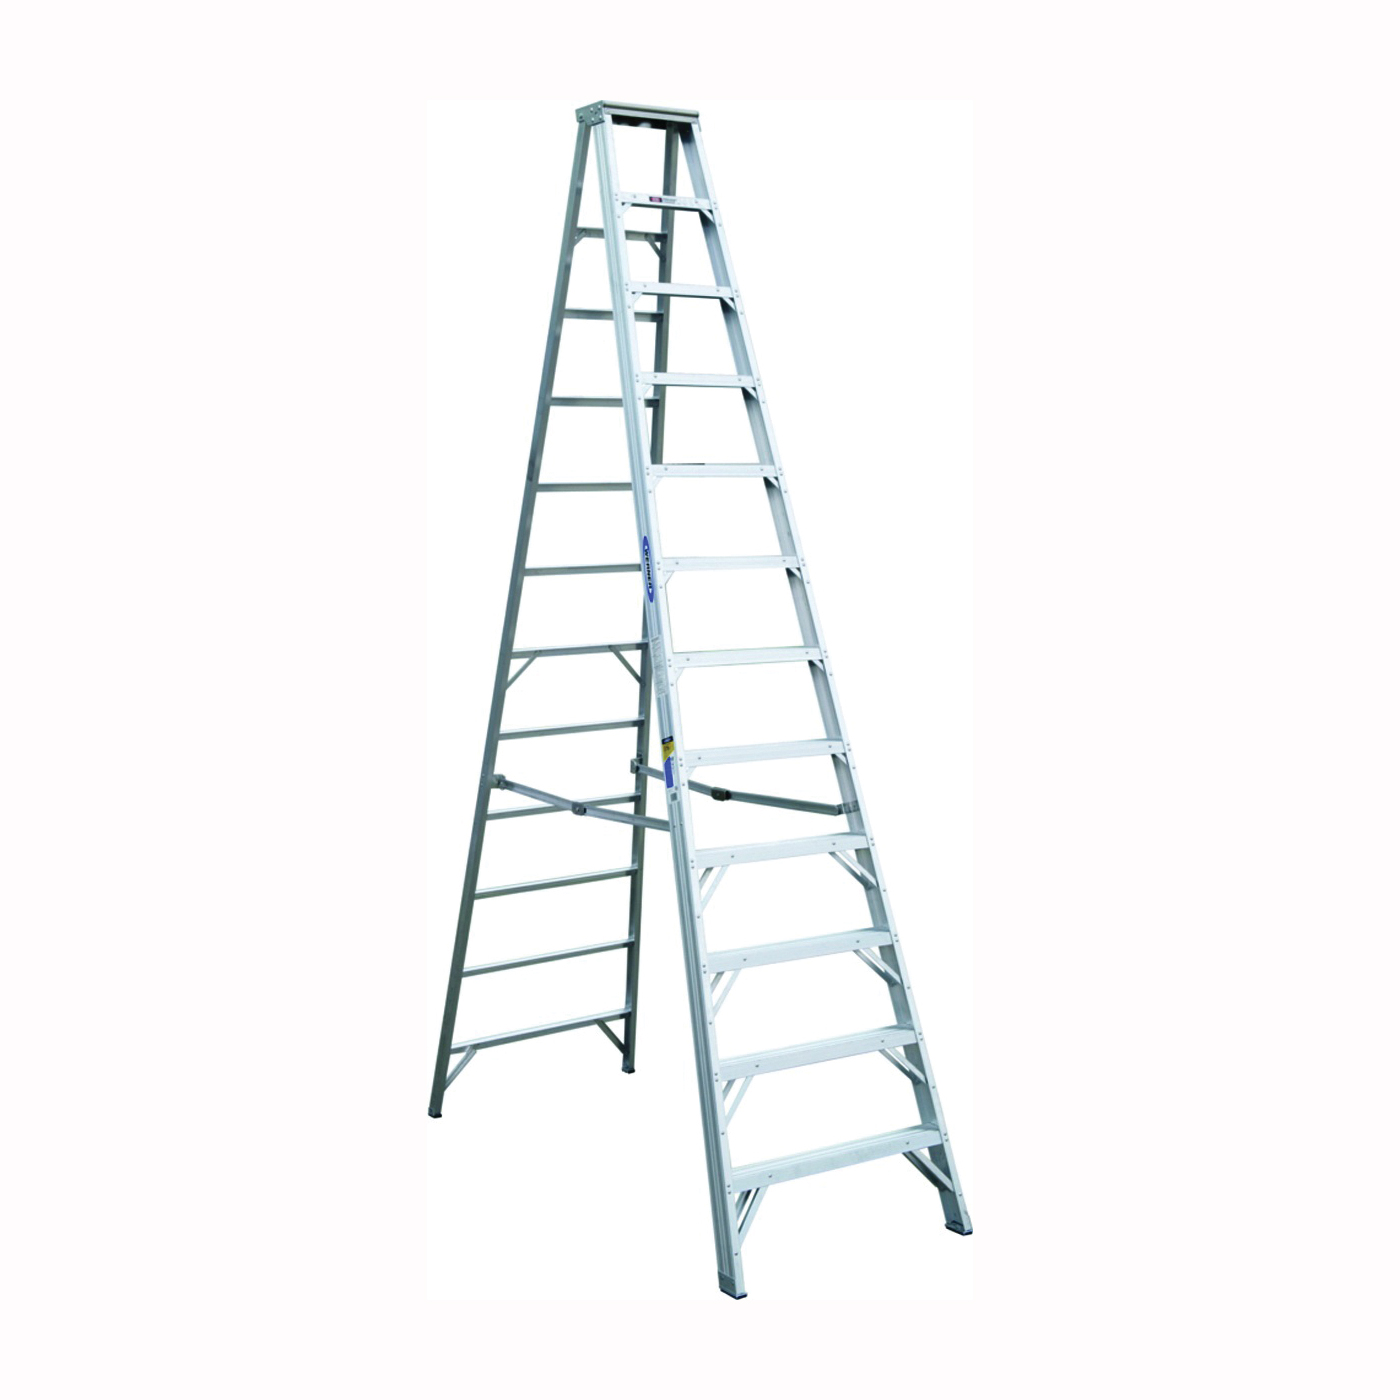 WERNER 412  12 ft. Step Ladder, 16 ft. Max Reach, 11-Step, 375 lb, Type IAA Duty Rating, Aluminum